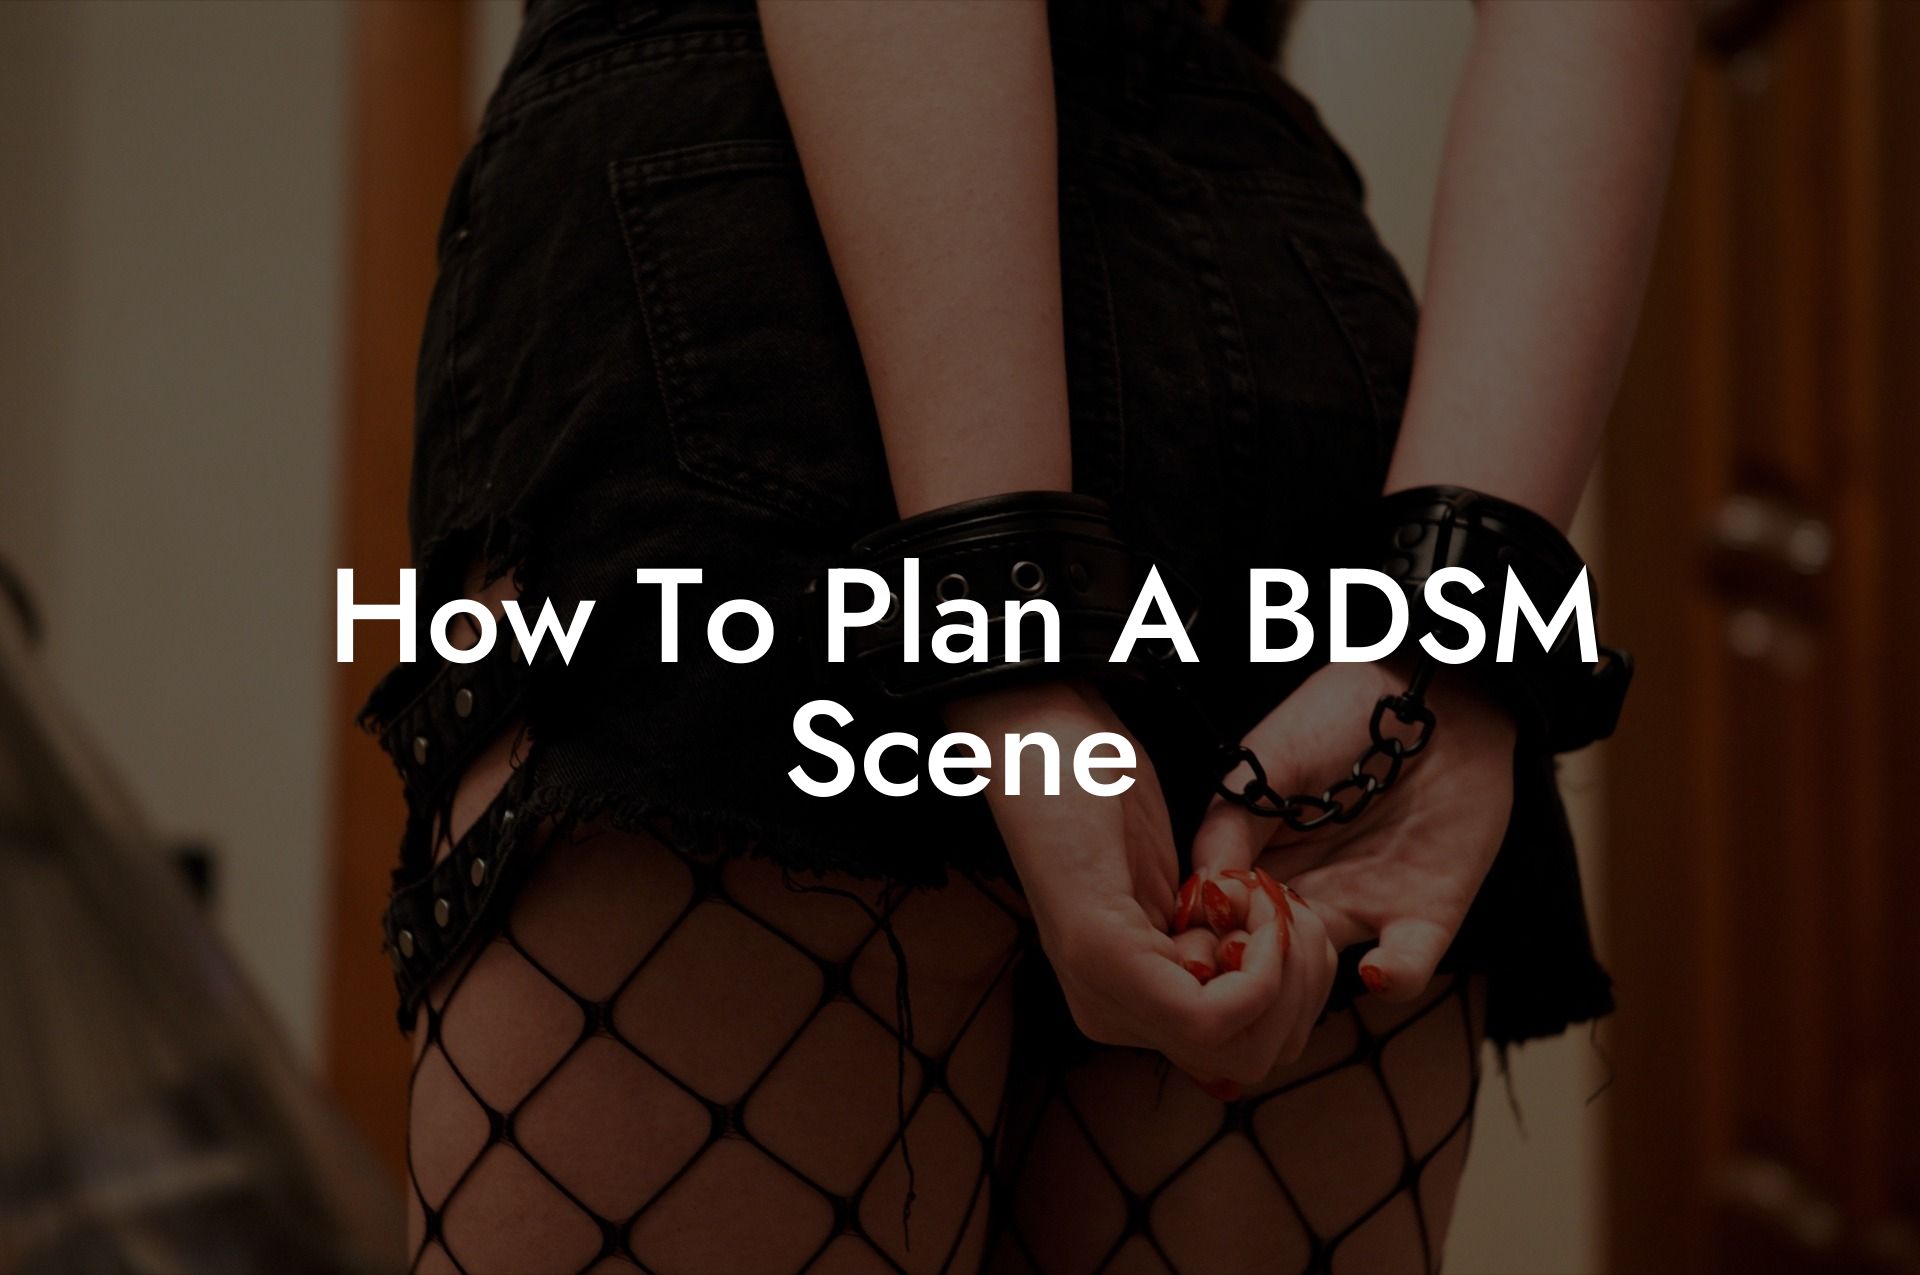 How To Plan A BDSM Scene